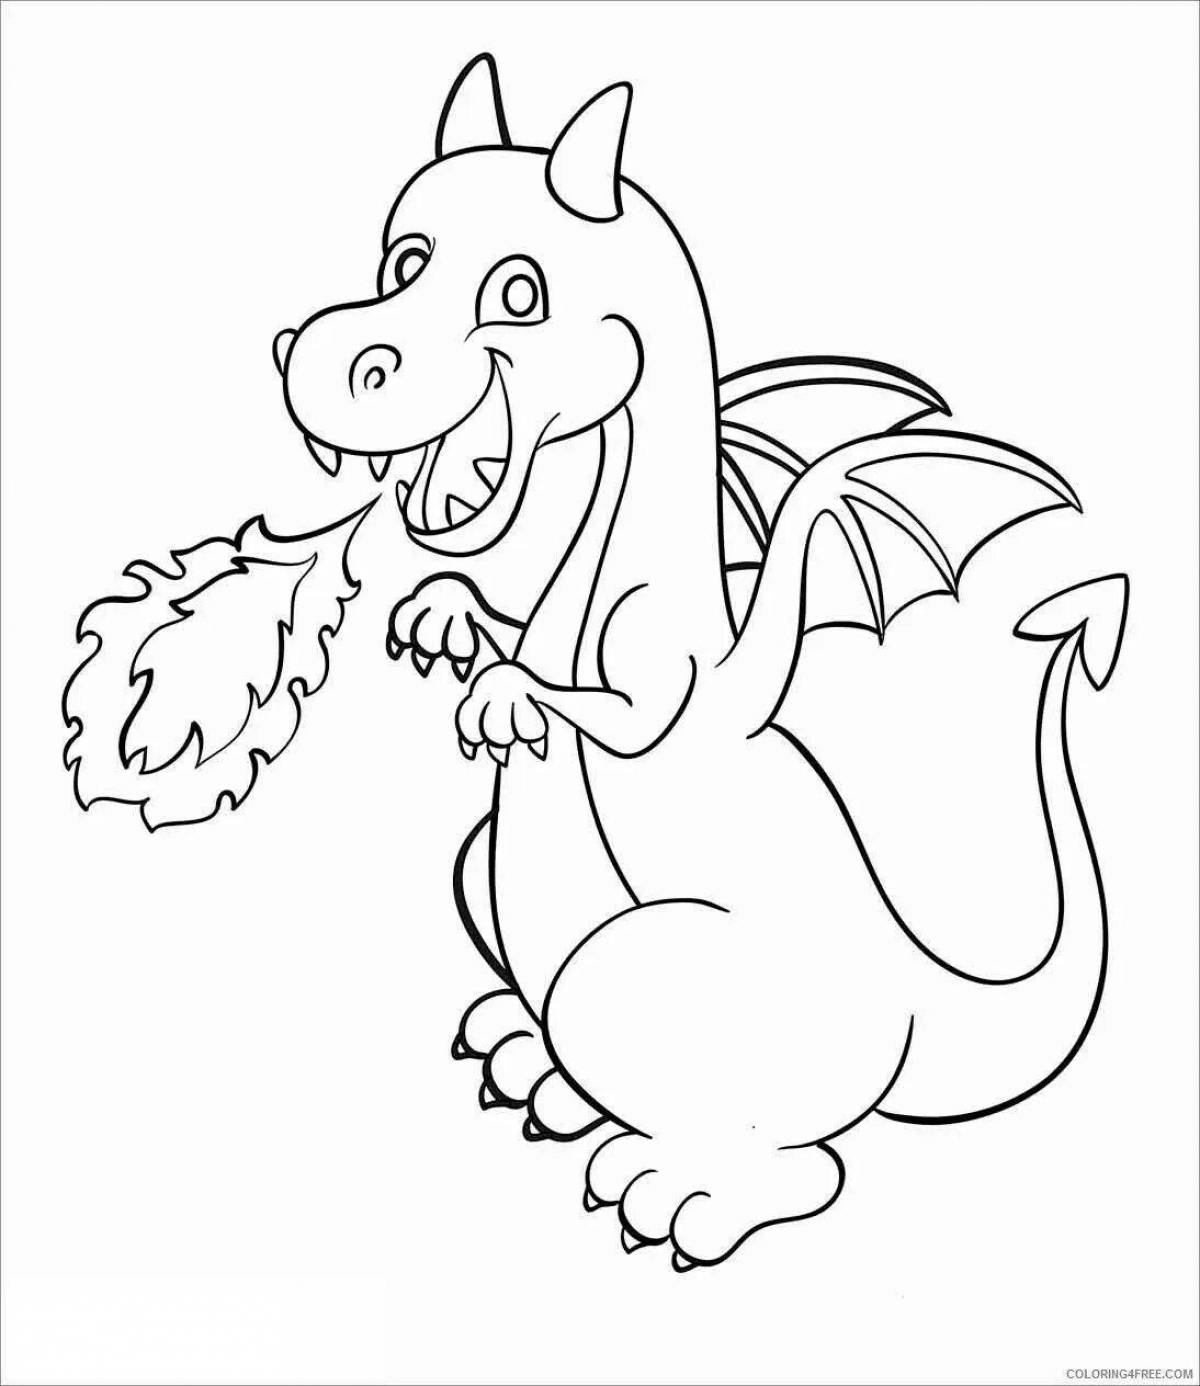 Wonderful coloring dragons for children 4-5 years old